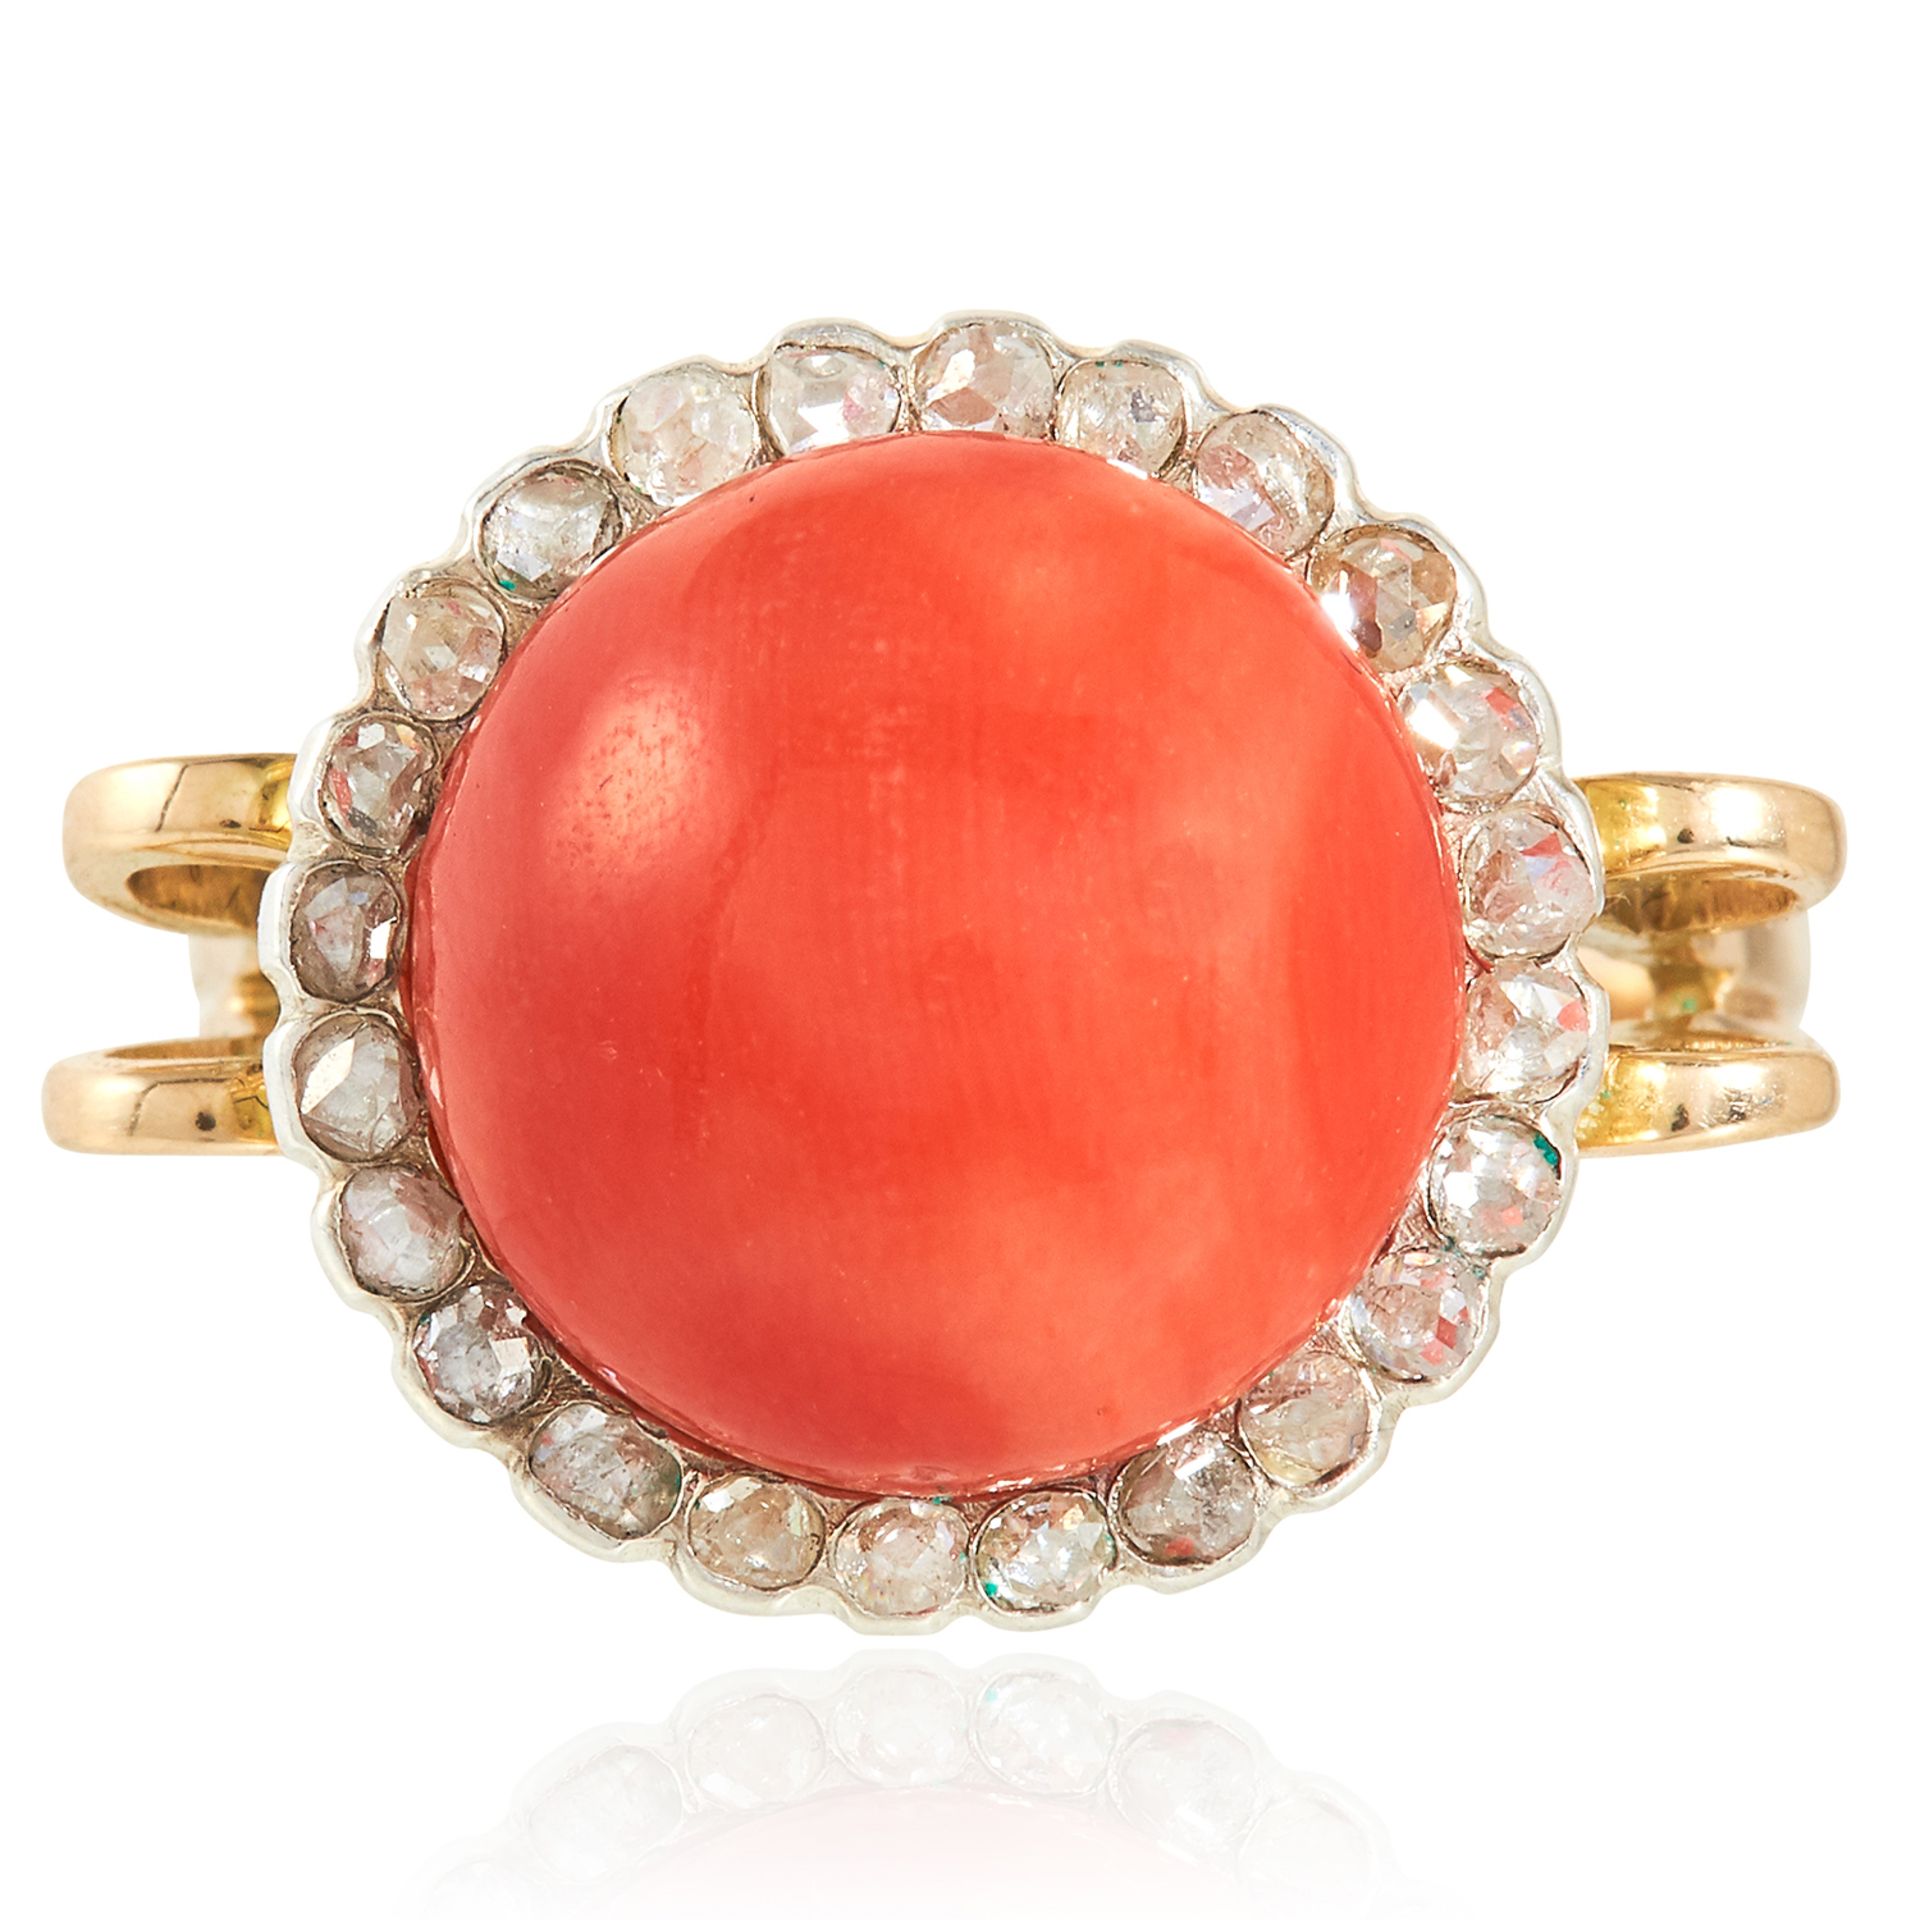 AN ANTIQUE CORAL AND DIAMOND RING in high carat yellow gold, the polished coral bead of 12.5mm